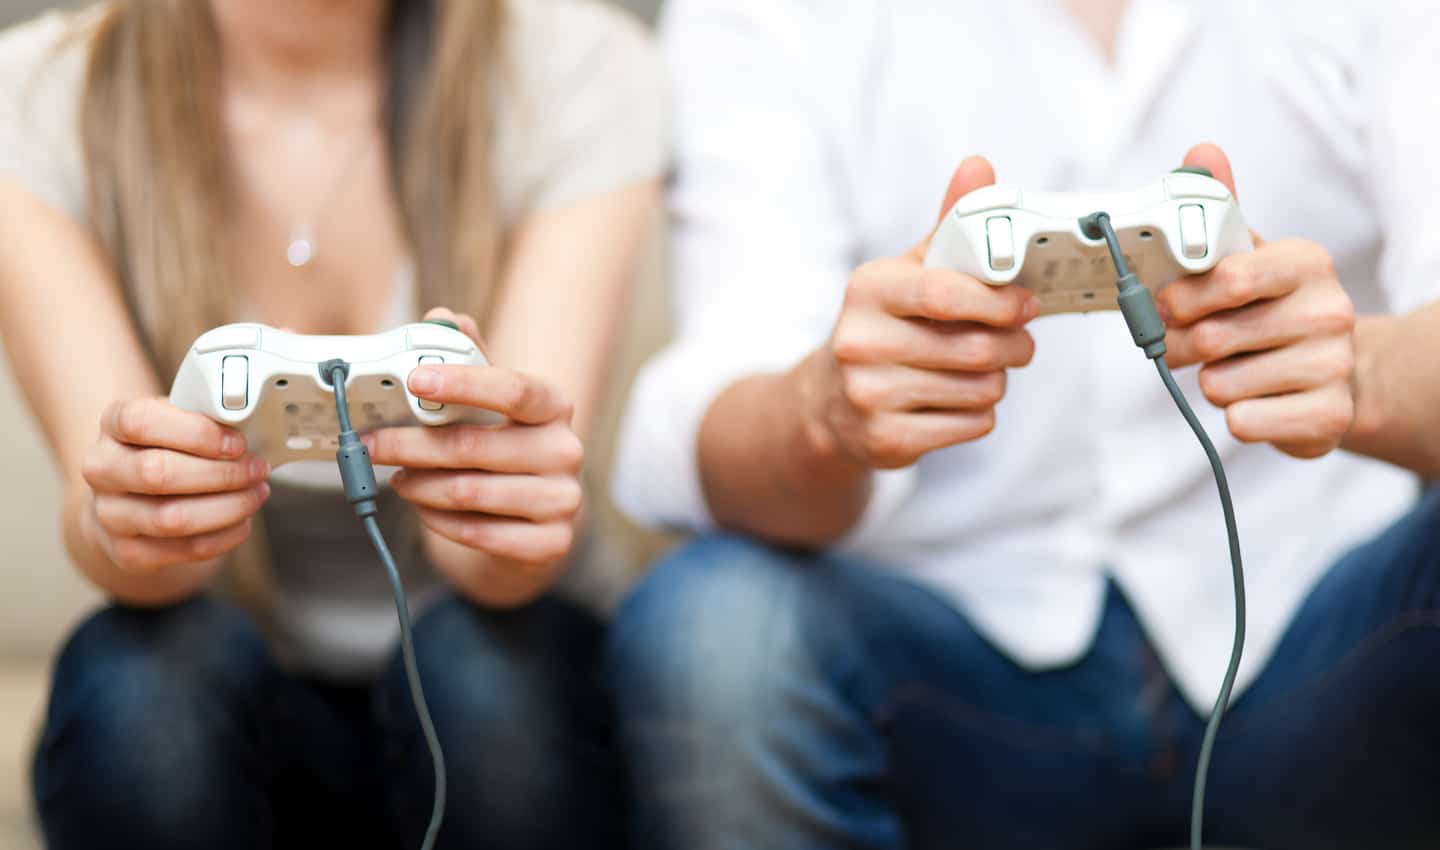 13 Best Places to Sell Video Games for Cash (2022 Edition)